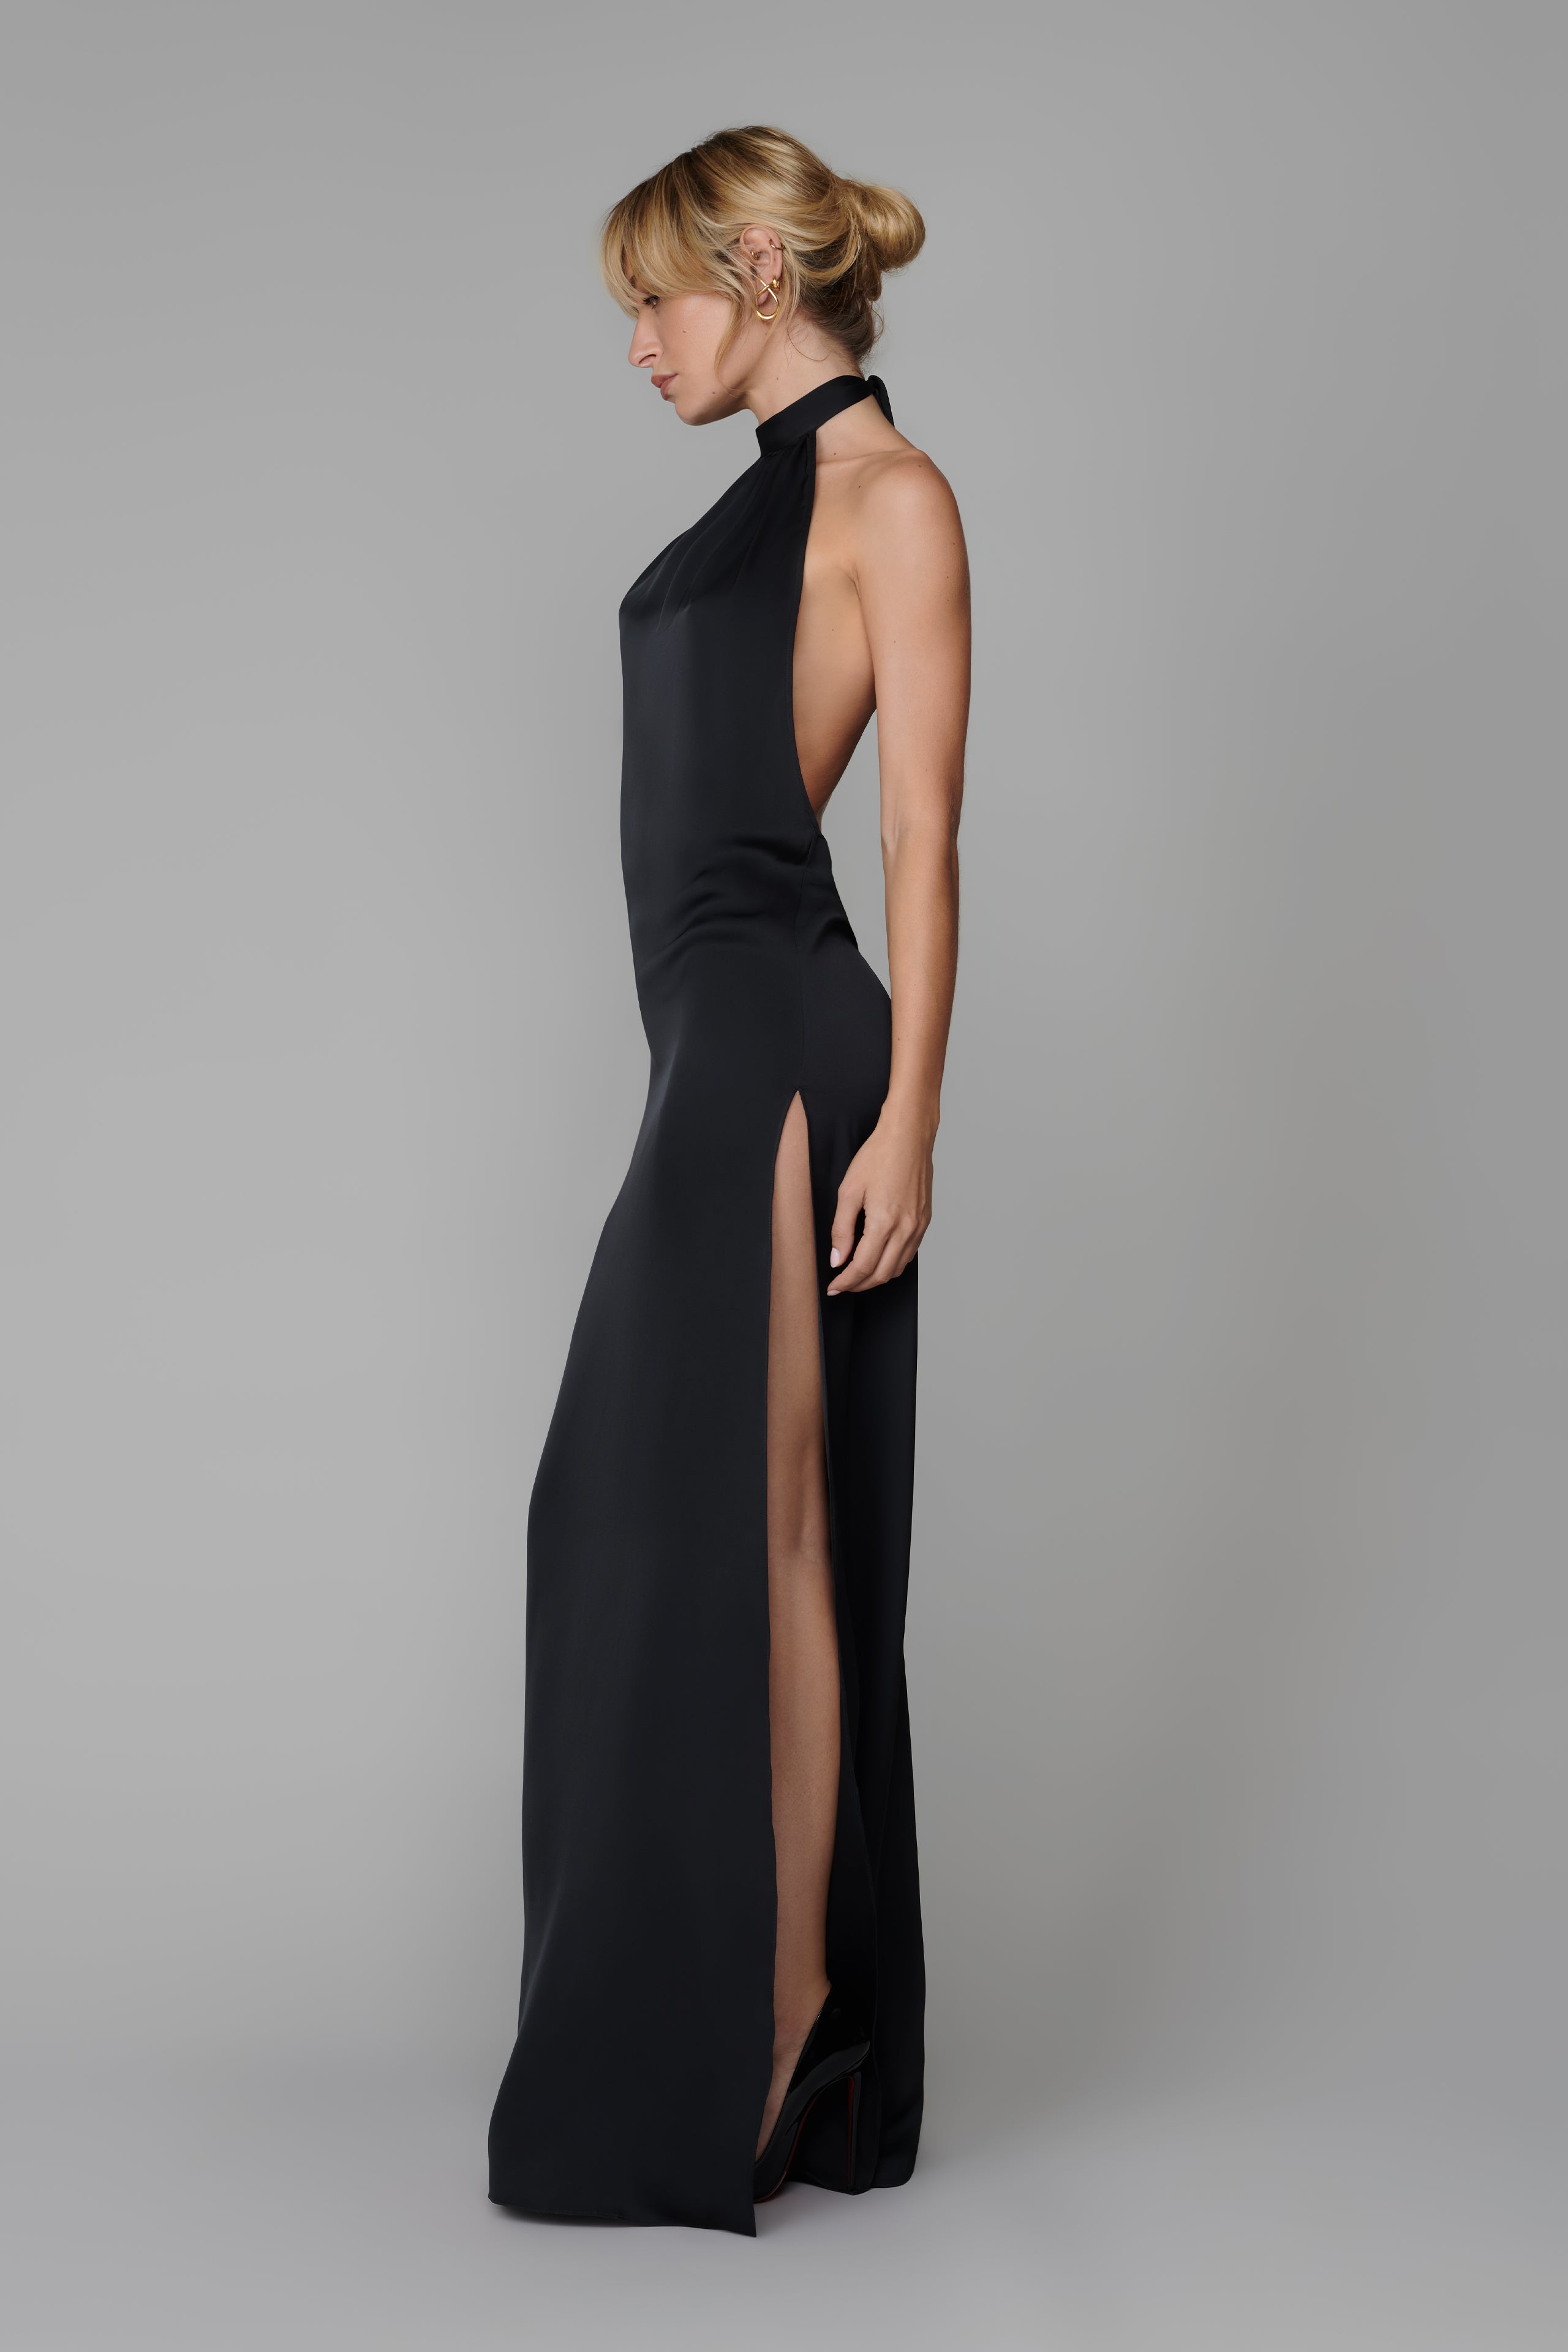 I'm looking for an open back black dress. Here is an example: : r/fashion